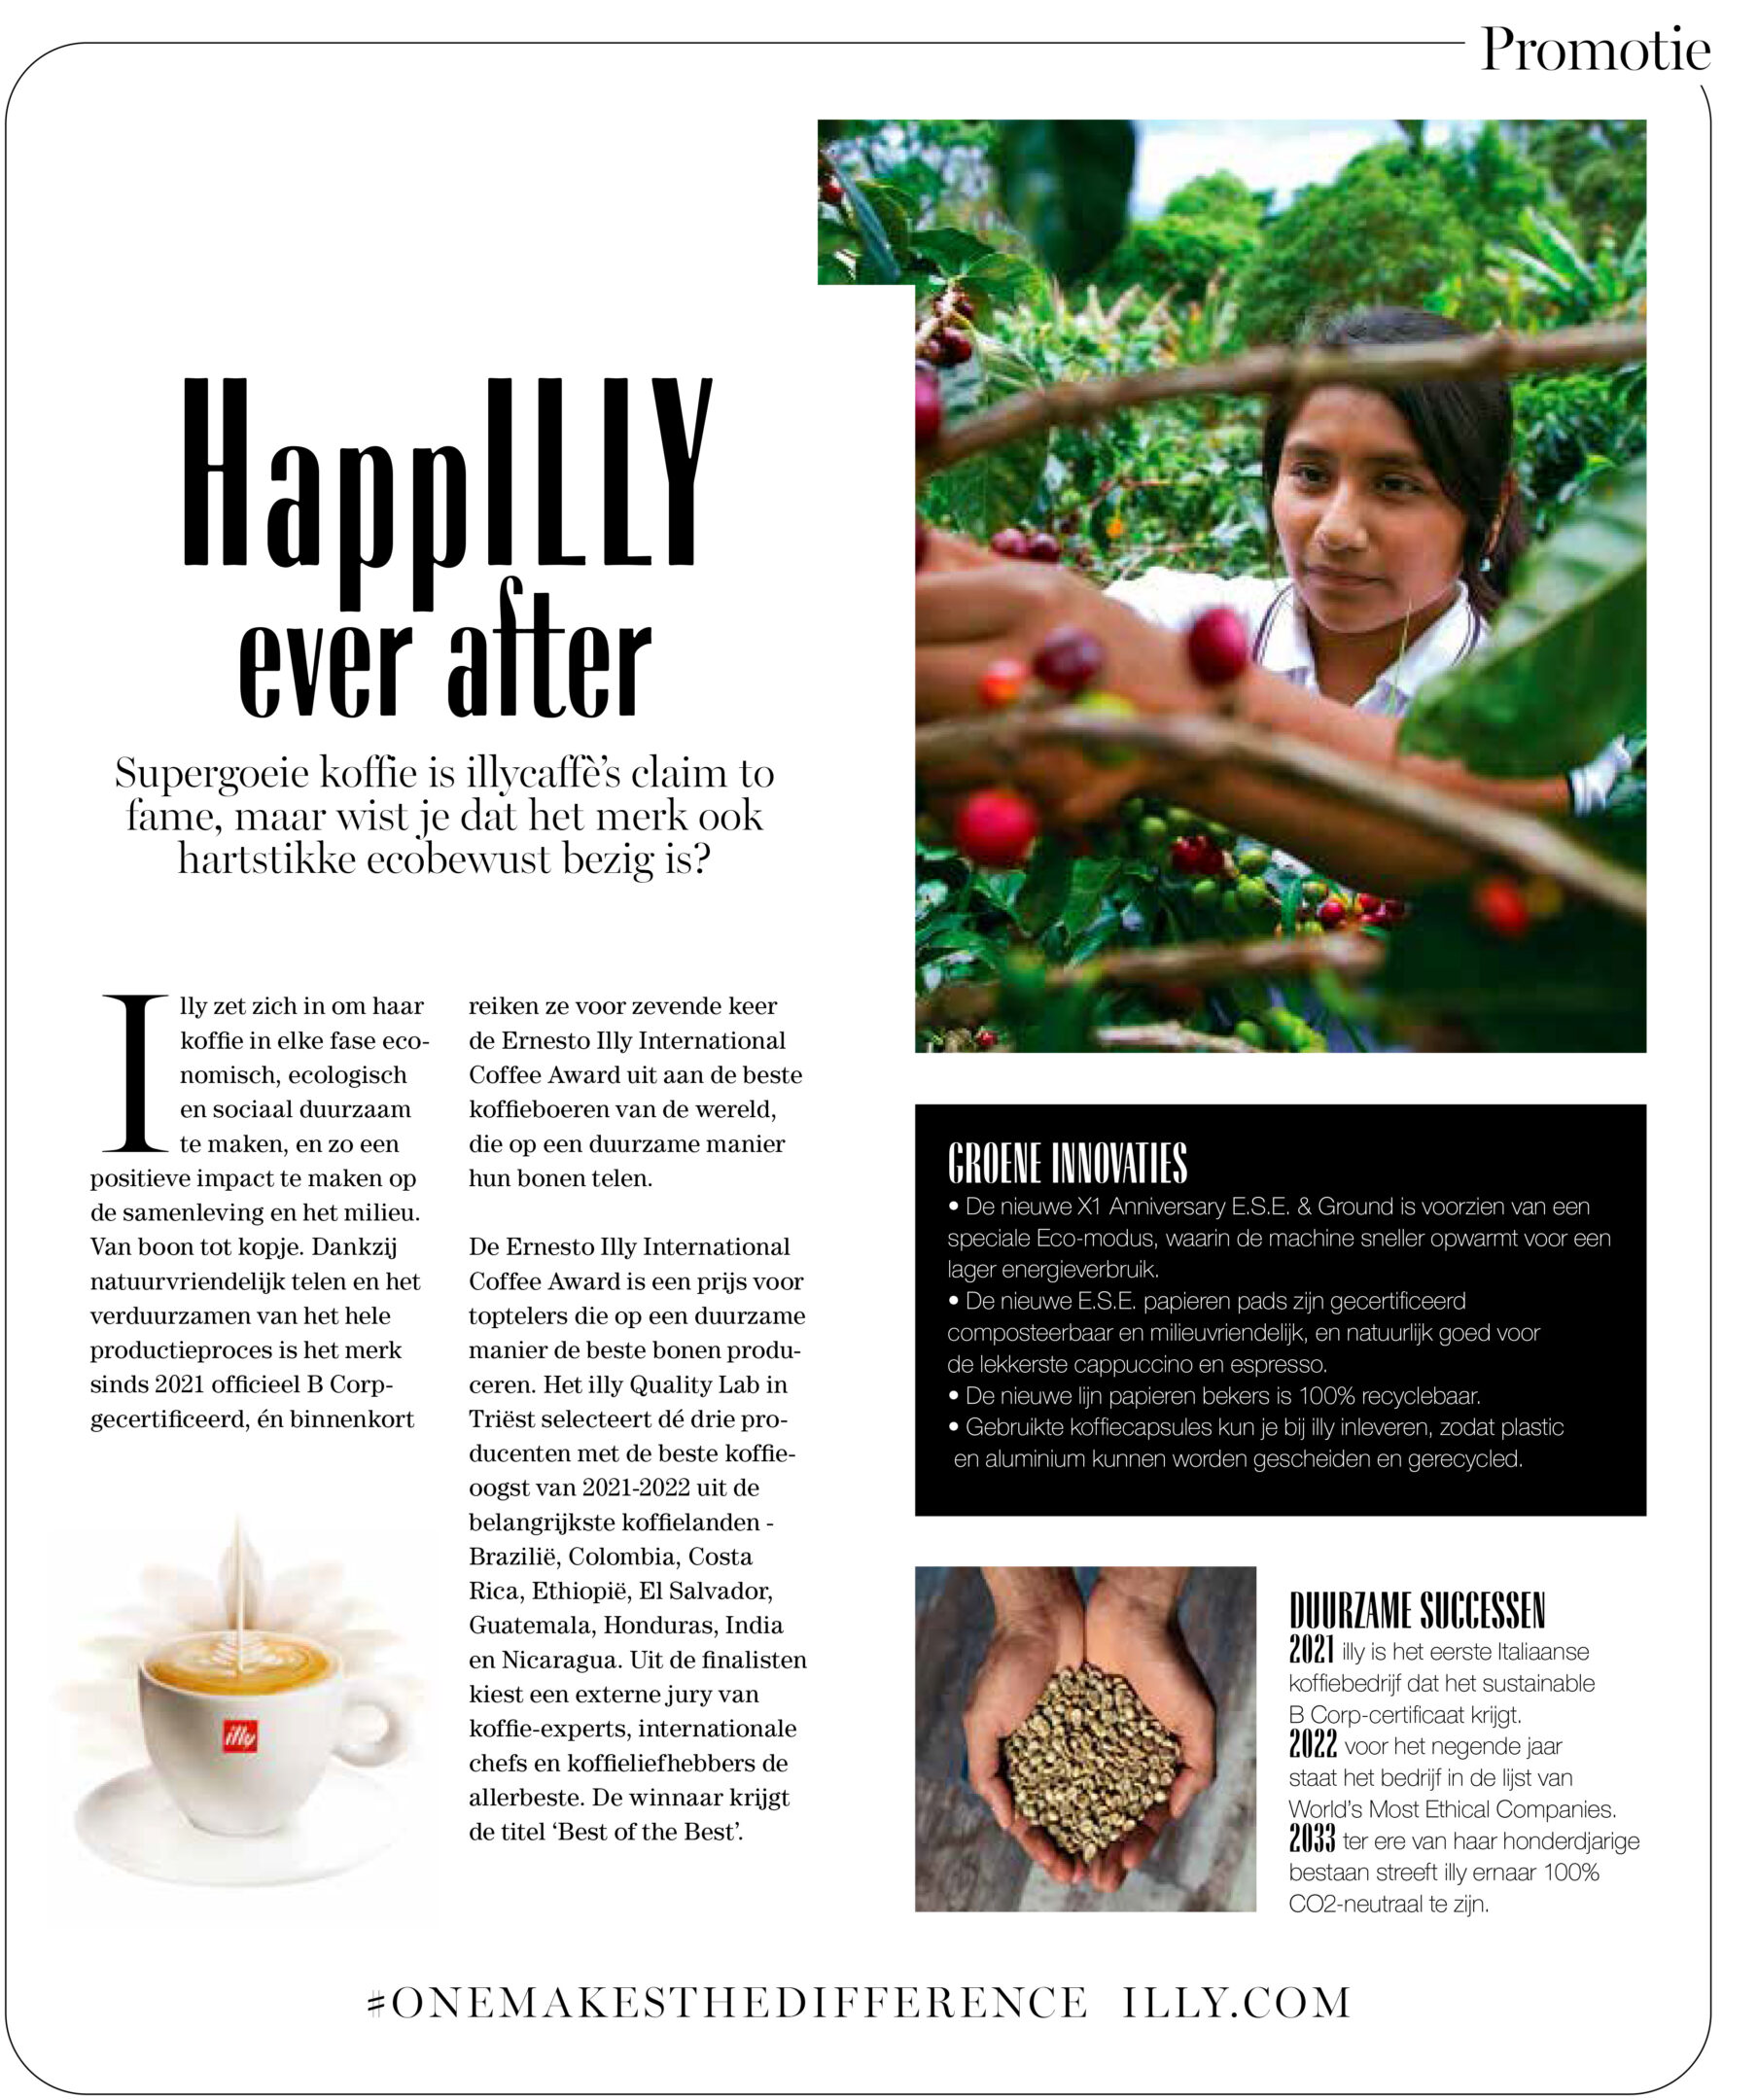 Publication of illy in the Marie Claire